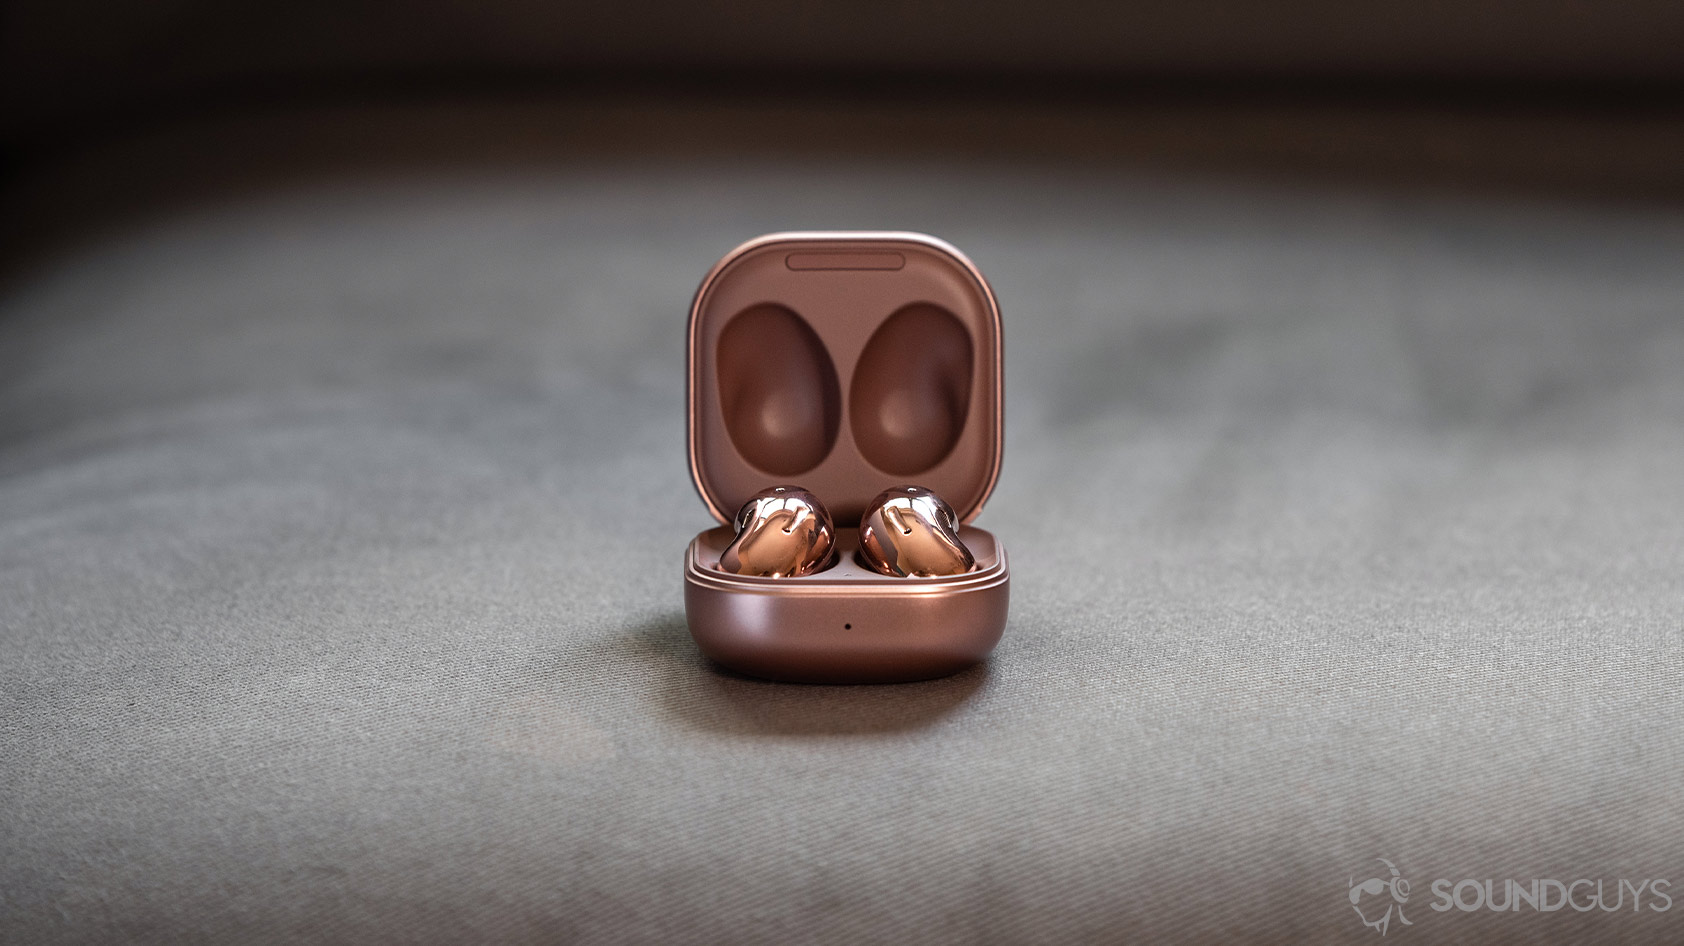 A picture of the Samsung Galaxy Buds Live noise canceling true wireless earbuds in the case against a gray background for a comparison in the Apple AirPods vs Samsung Galaxy Buds Live breakdown.